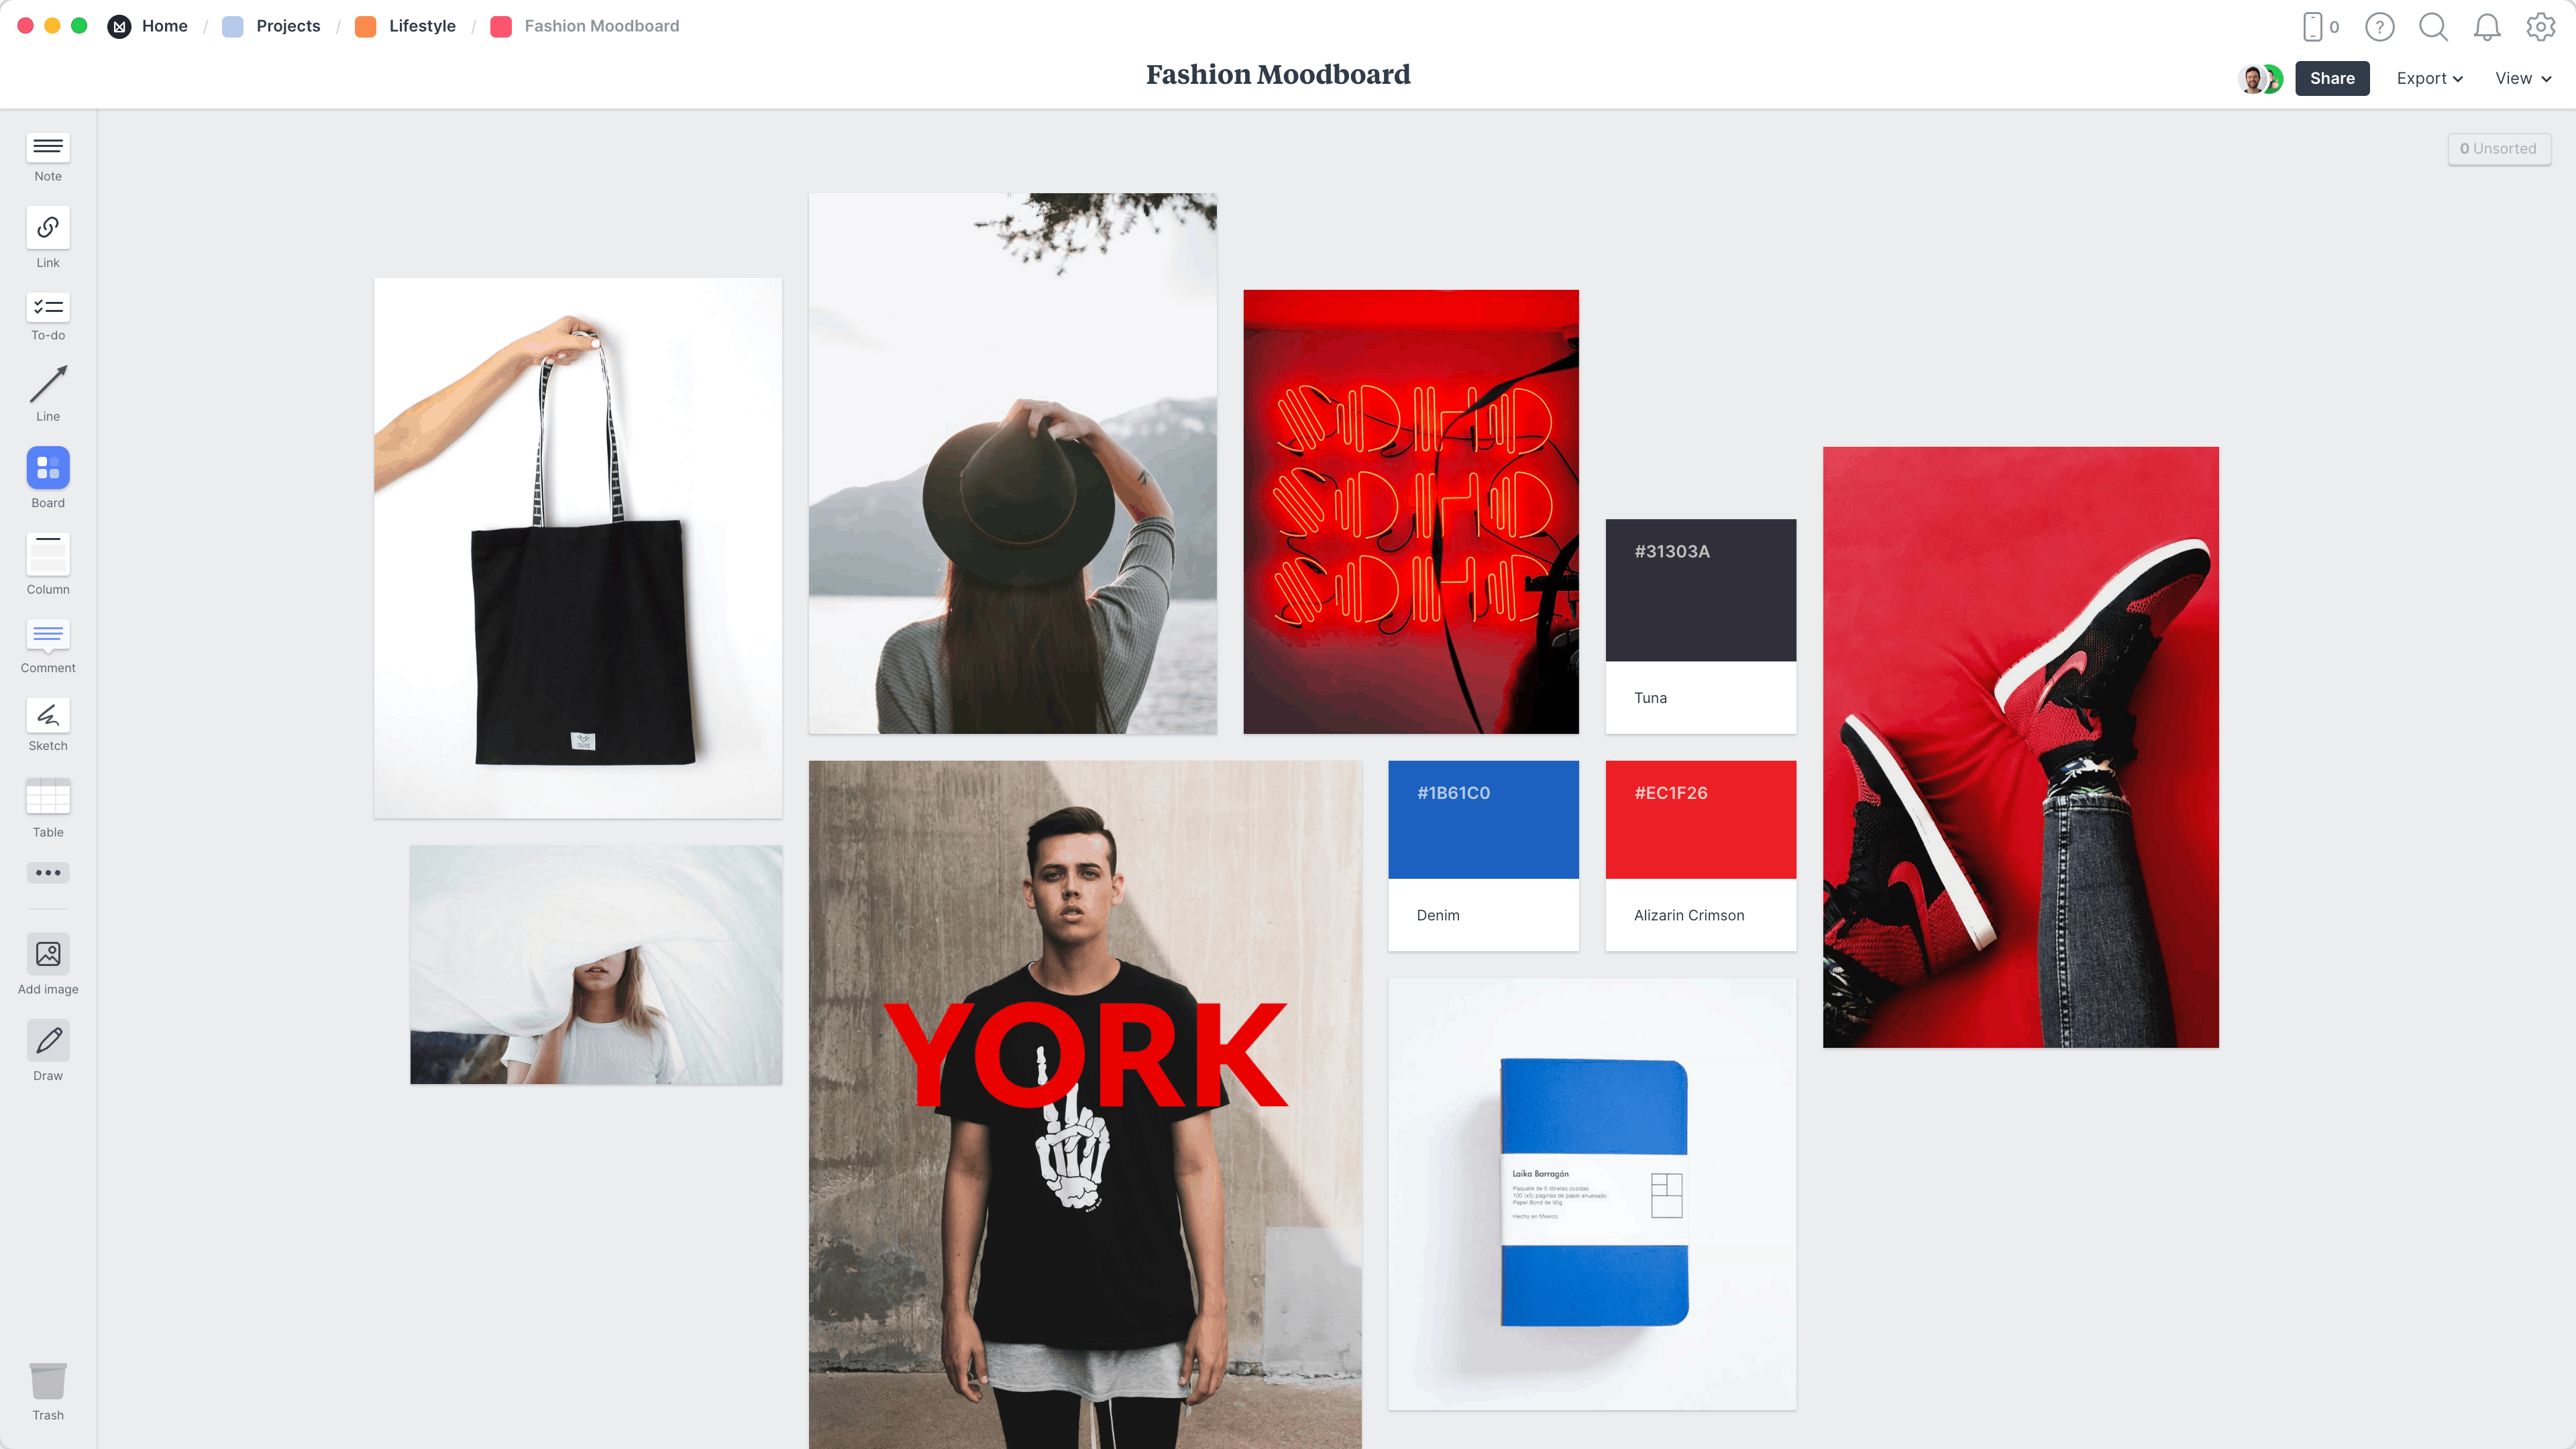 Fashion Moodboard Template, within the Milanote app